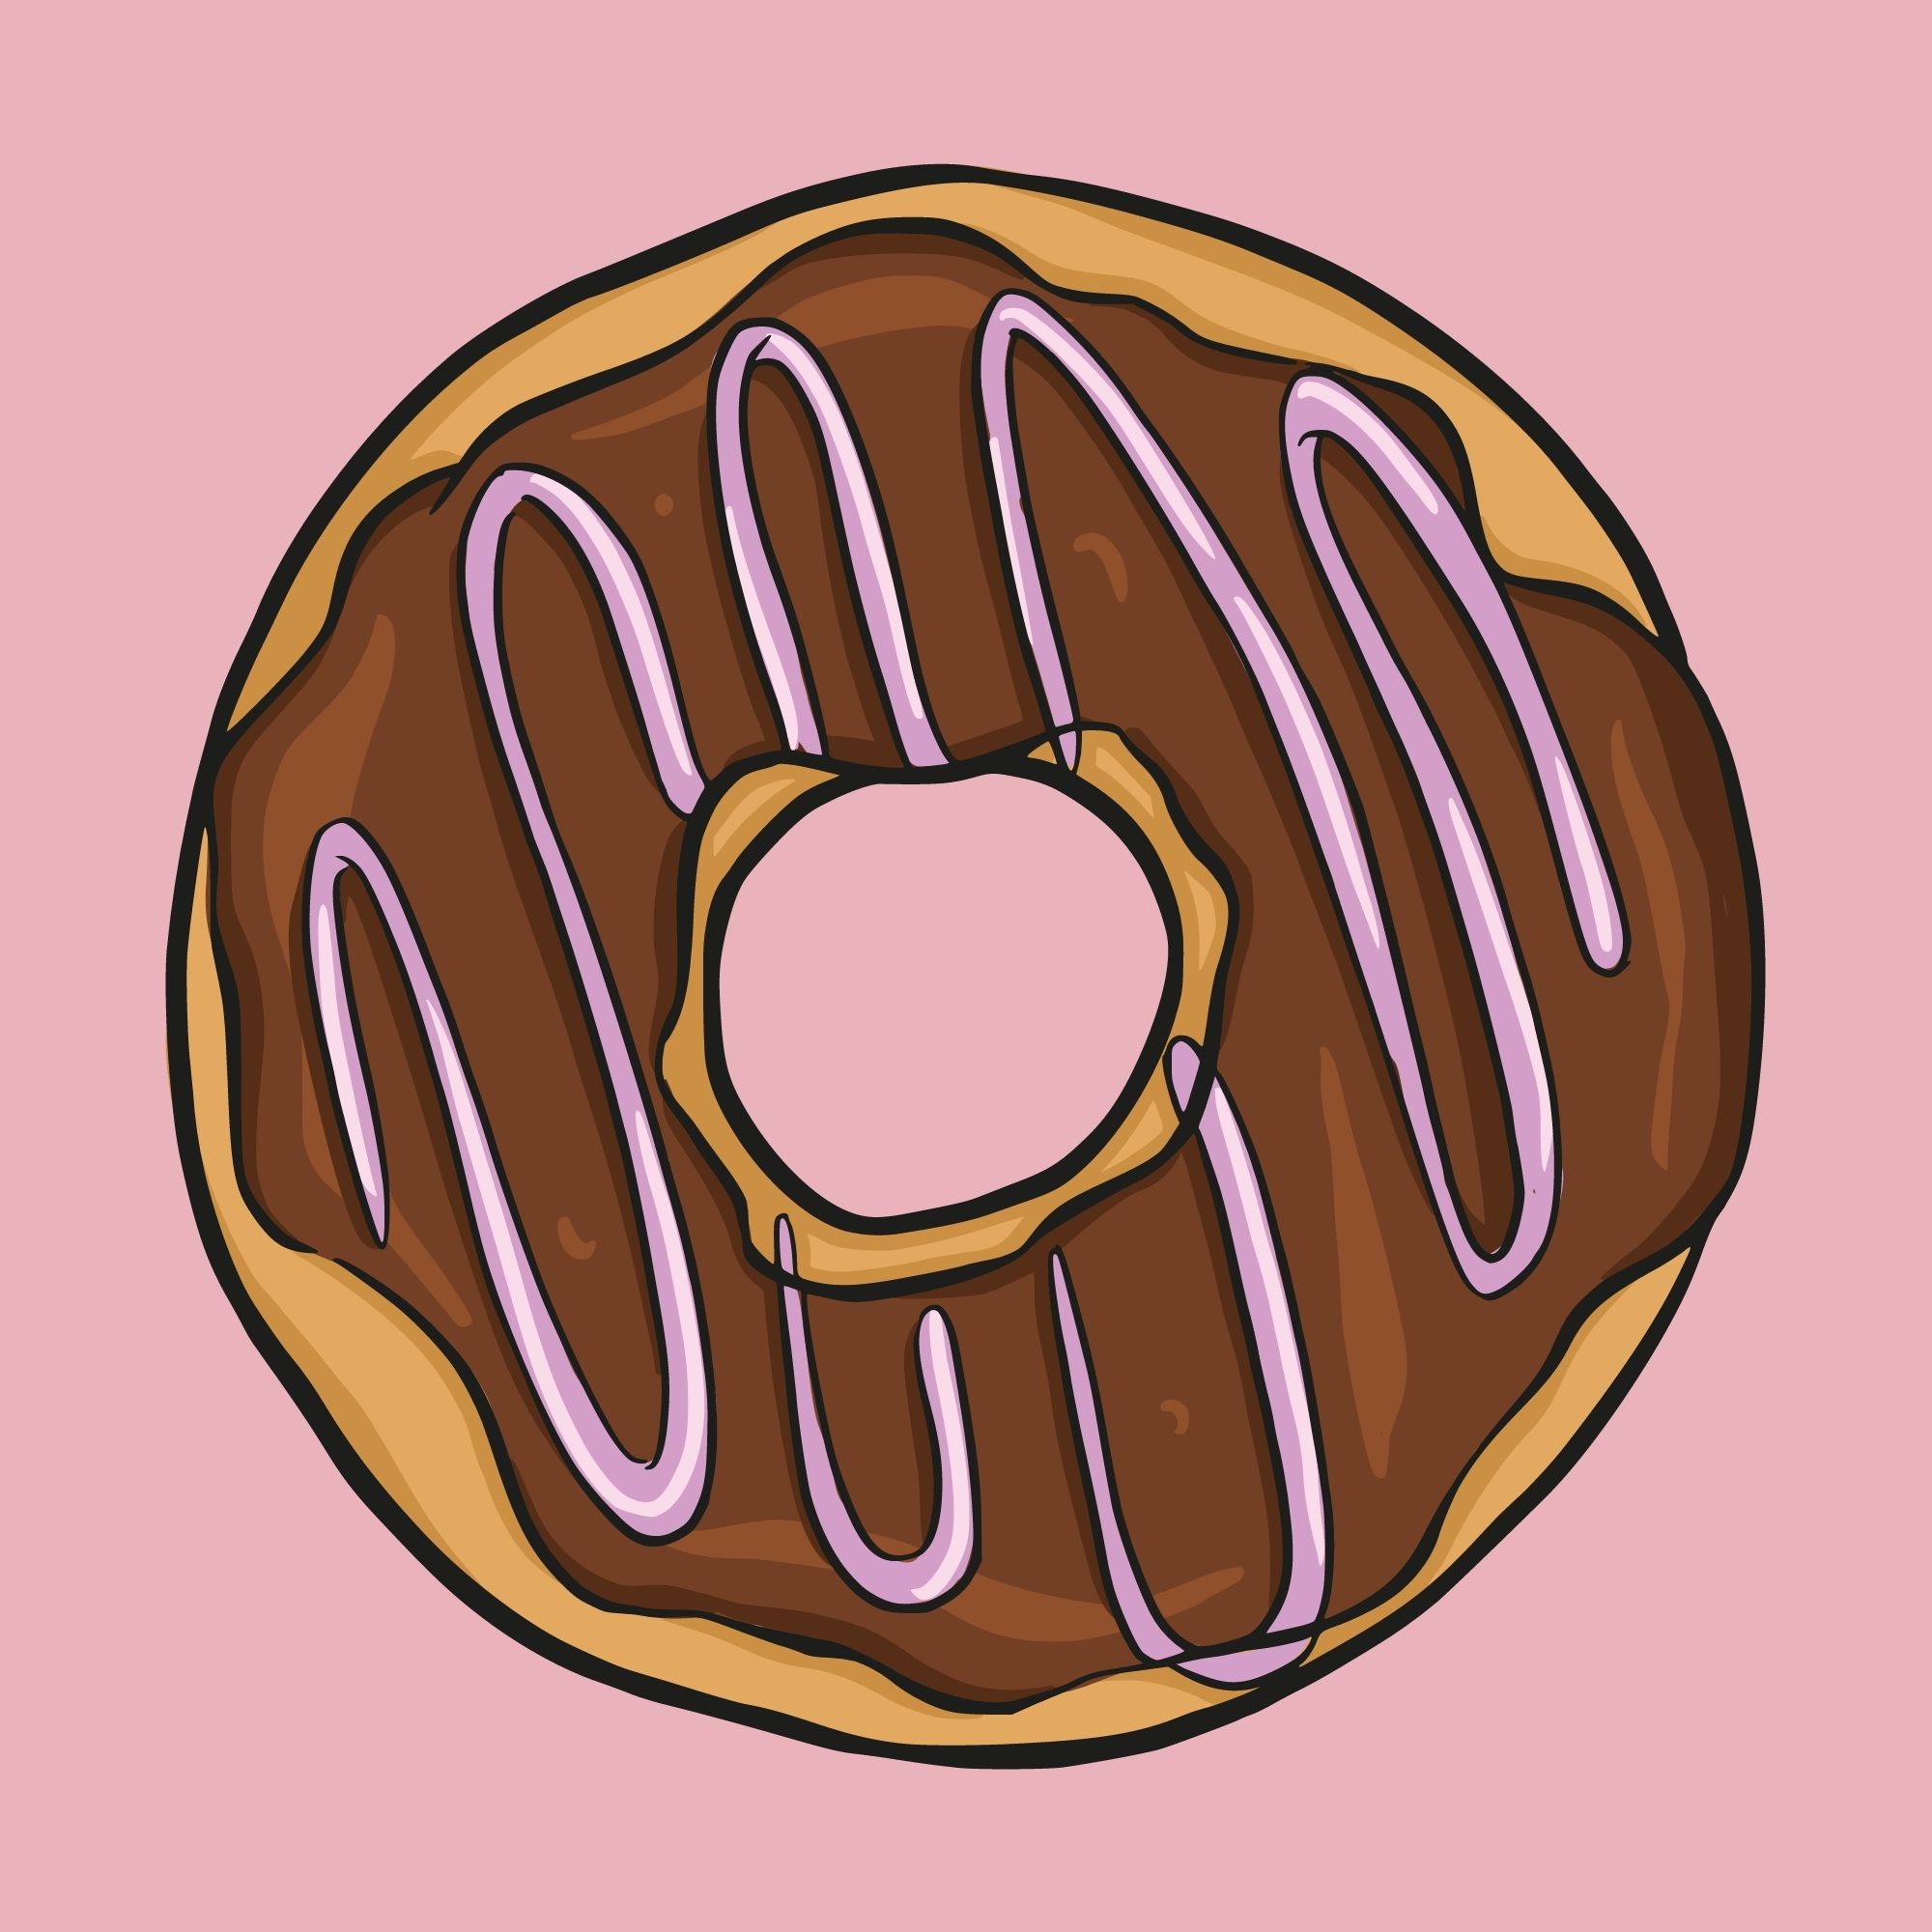 2000px x 2000px - Donut #37 - Poly Donuts | OpenSea